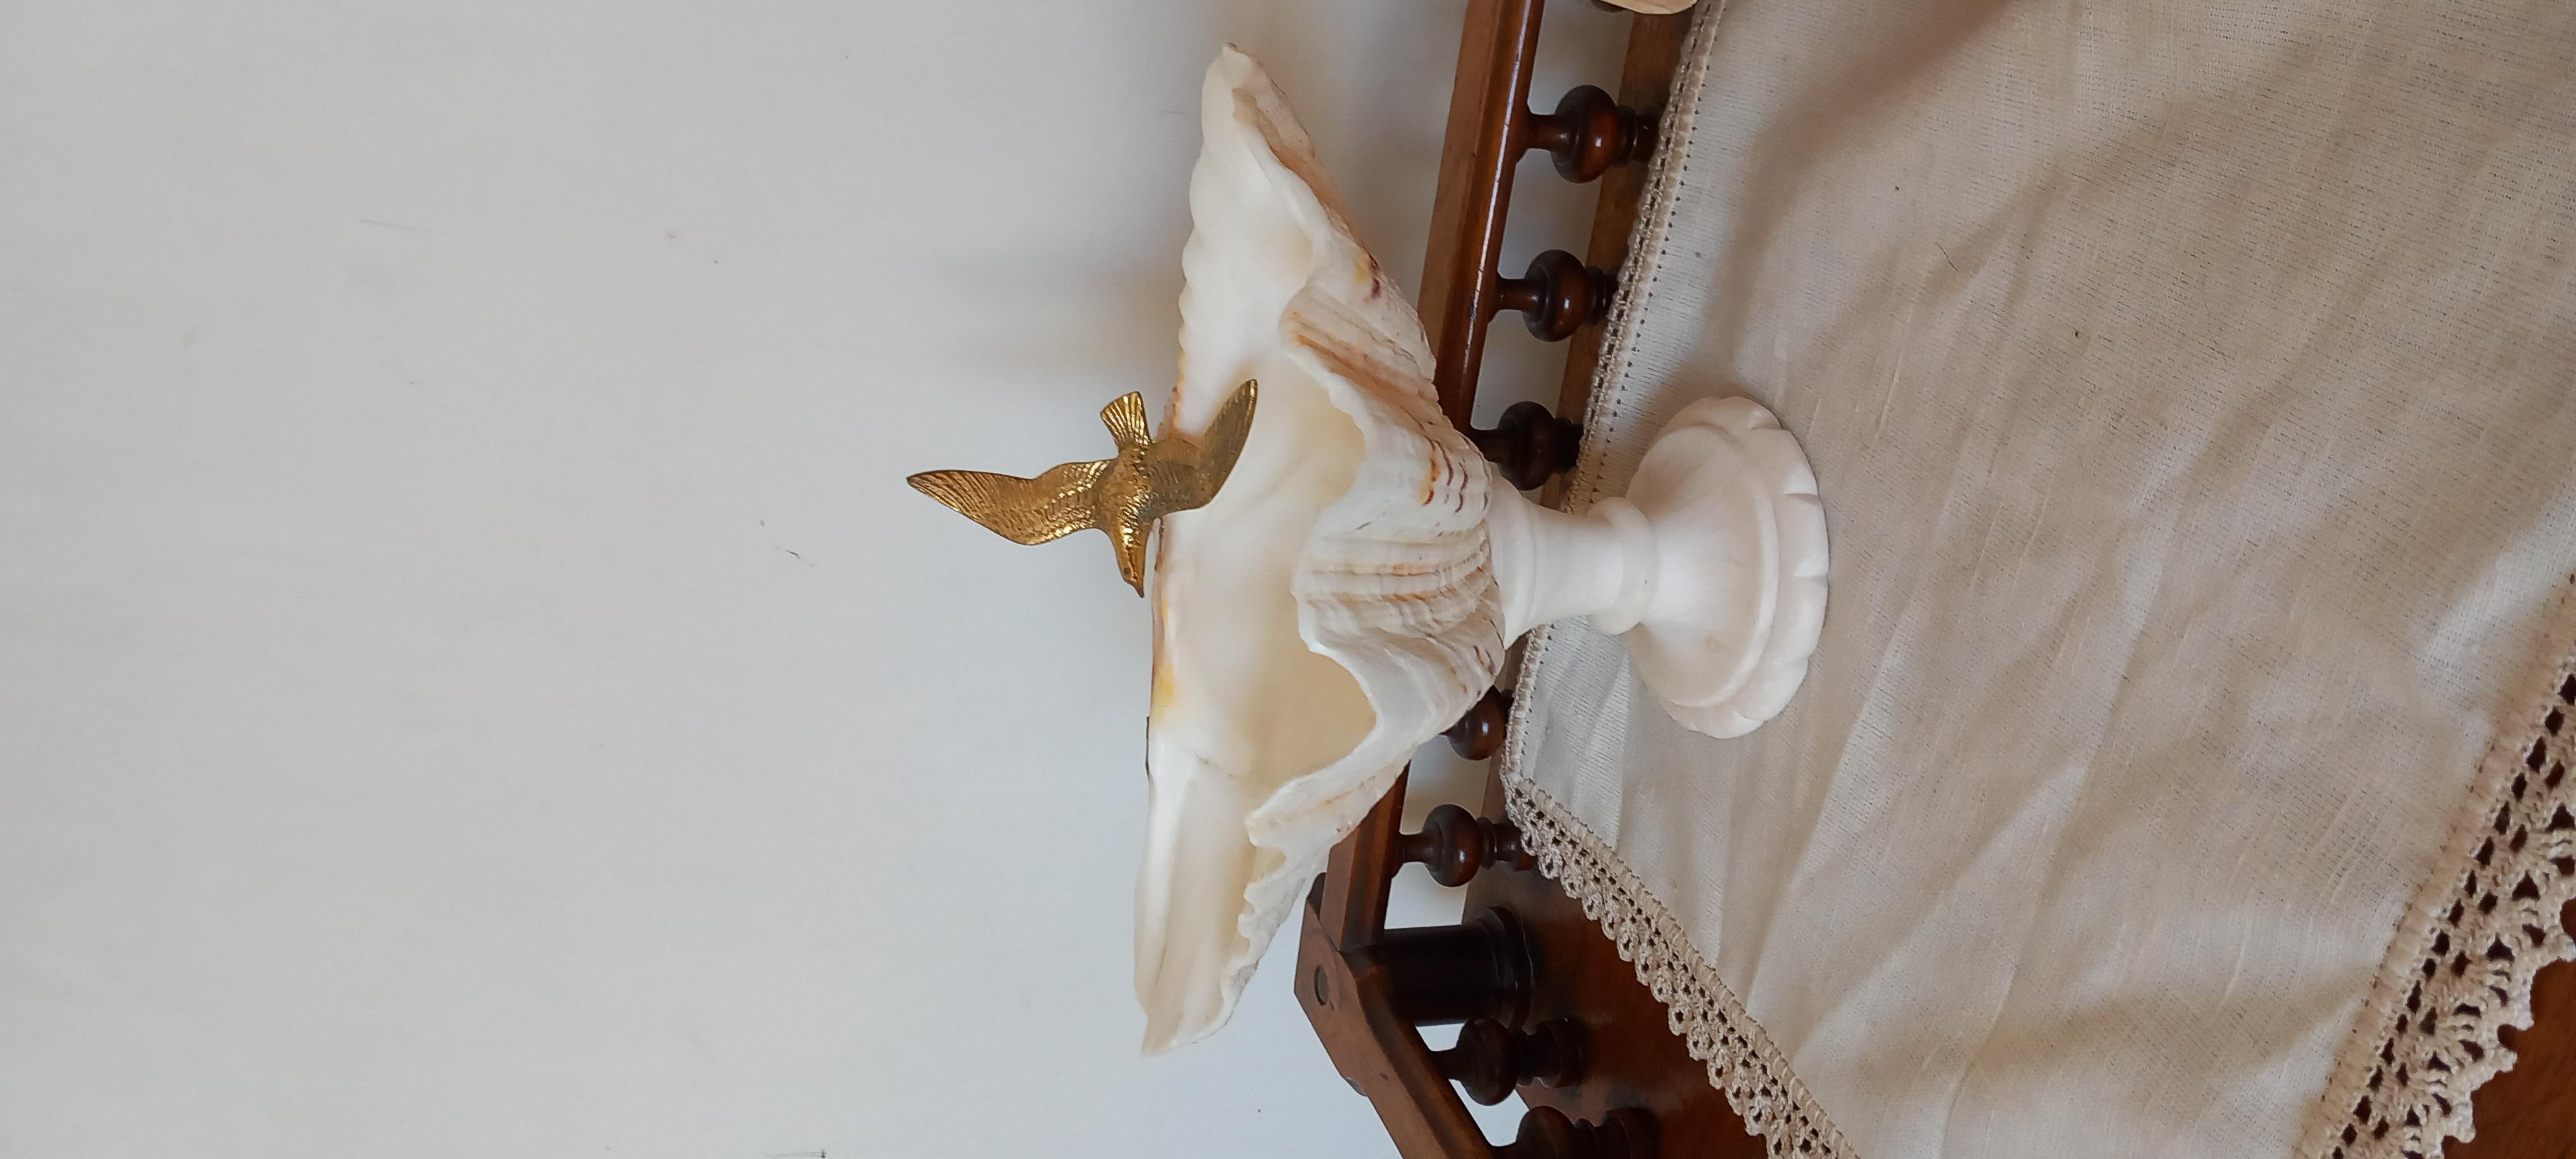  Shell Natural Specimen  With White Marble Pedestal Bronze Bird Can Be Removed For Sale 12